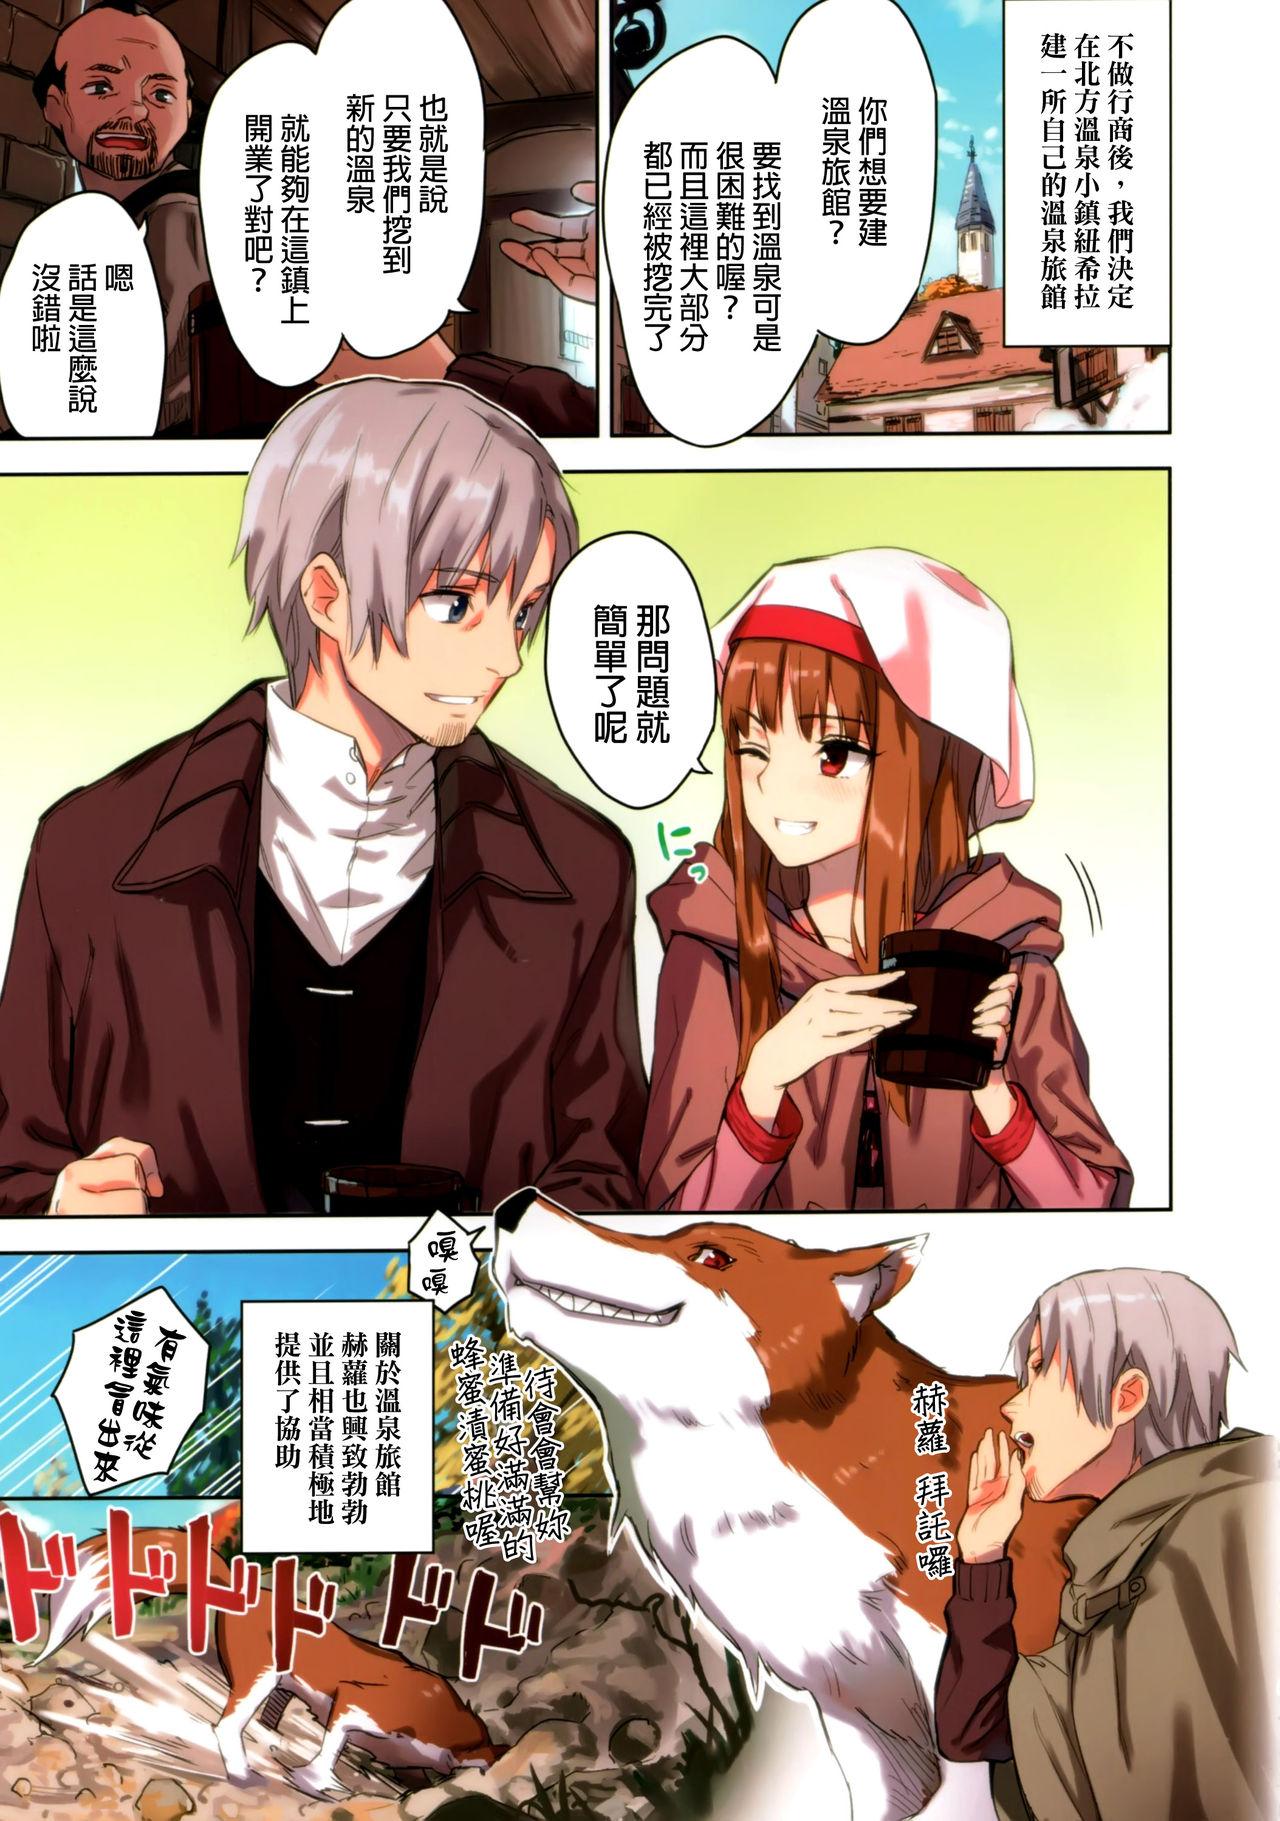 Camgirl Wacchi to Nyohhira Bon FULL COLOR - Spice and wolf Beard - Page 6